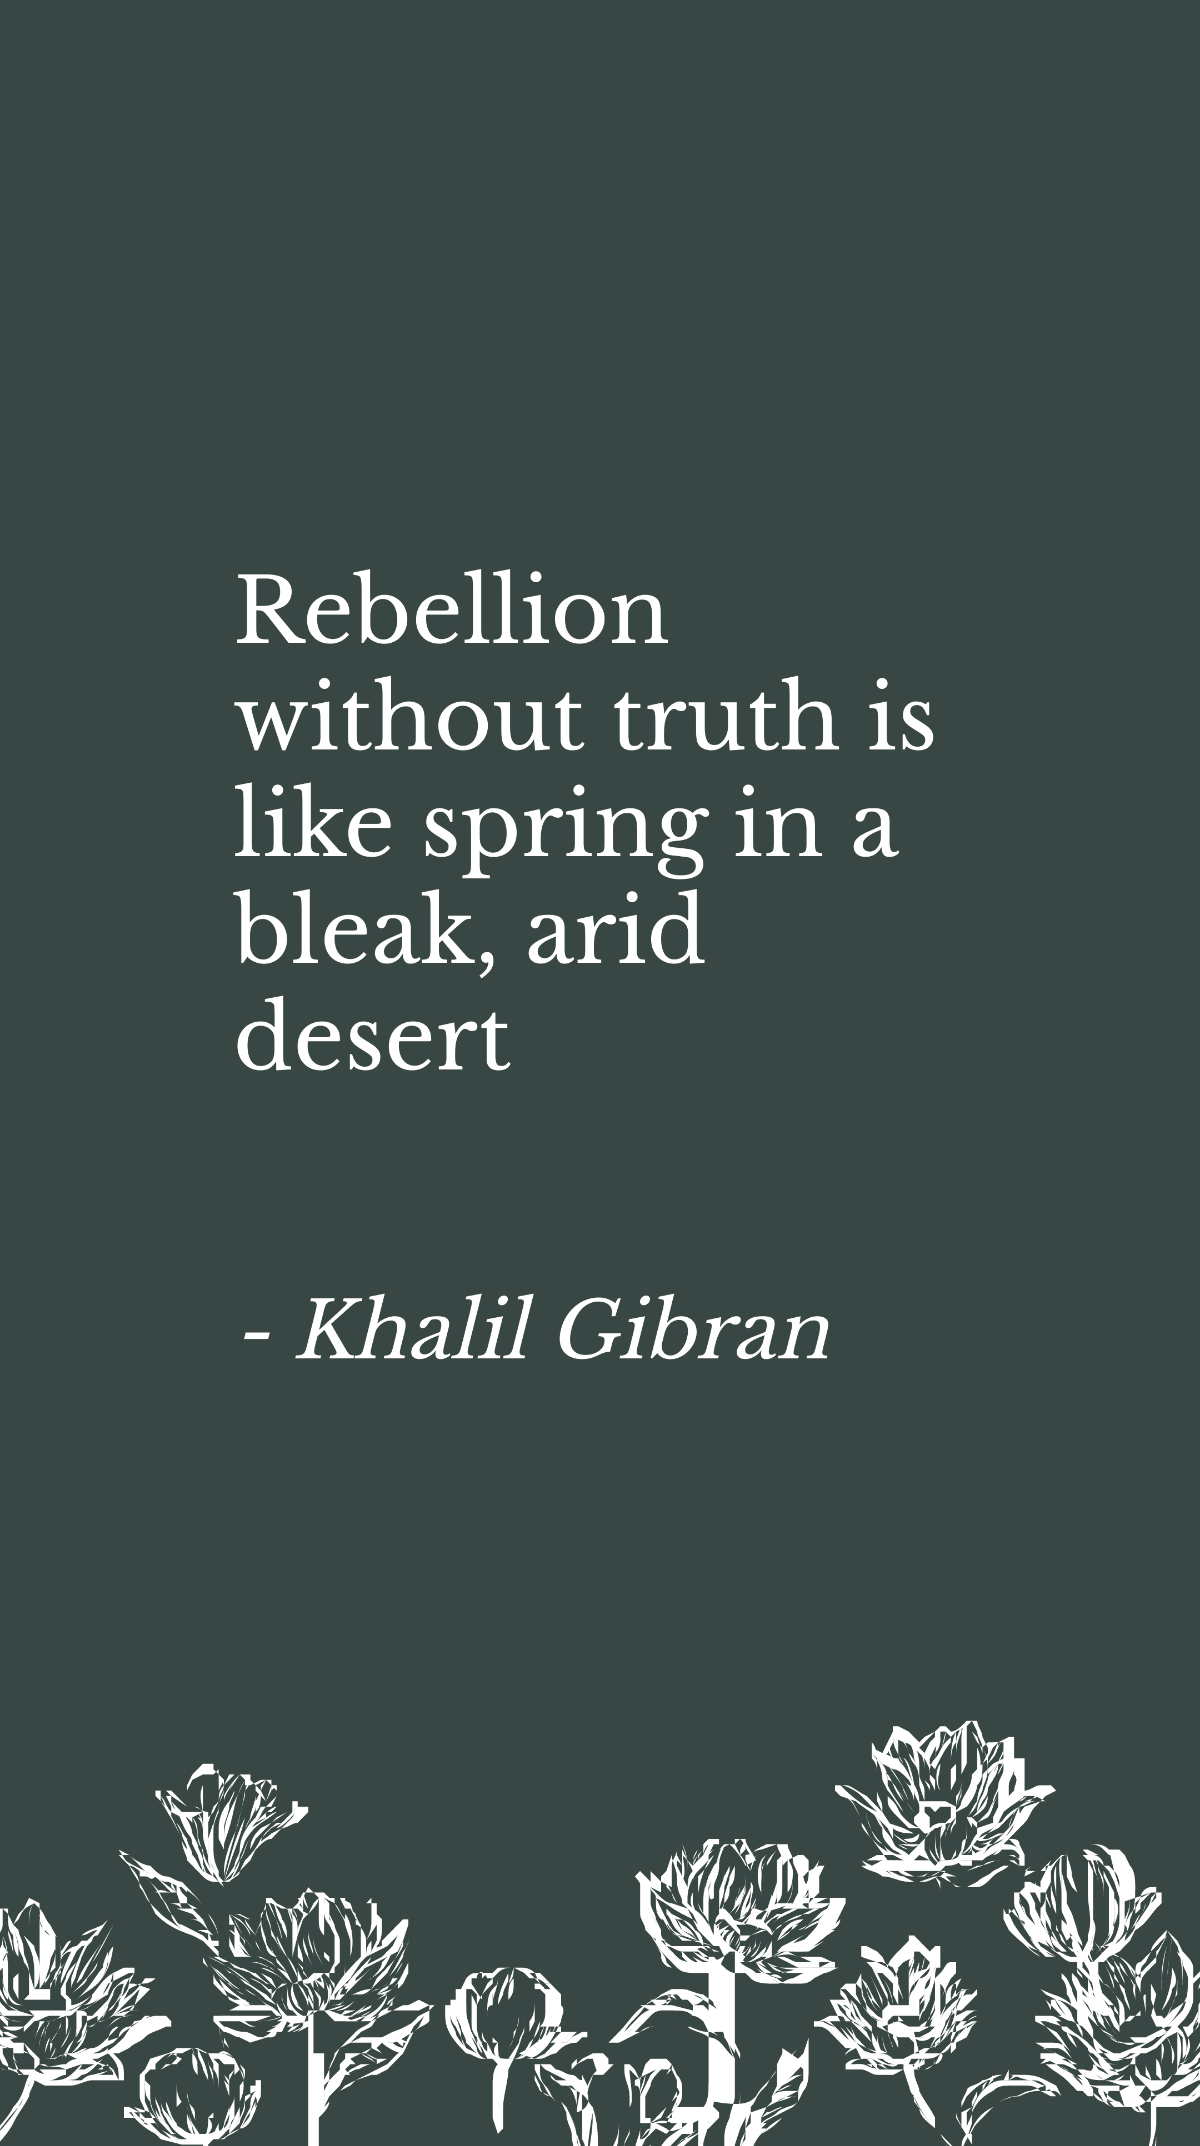 Free Khalil Gibran - Rebellion without truth is like spring in a bleak, arid desert Template